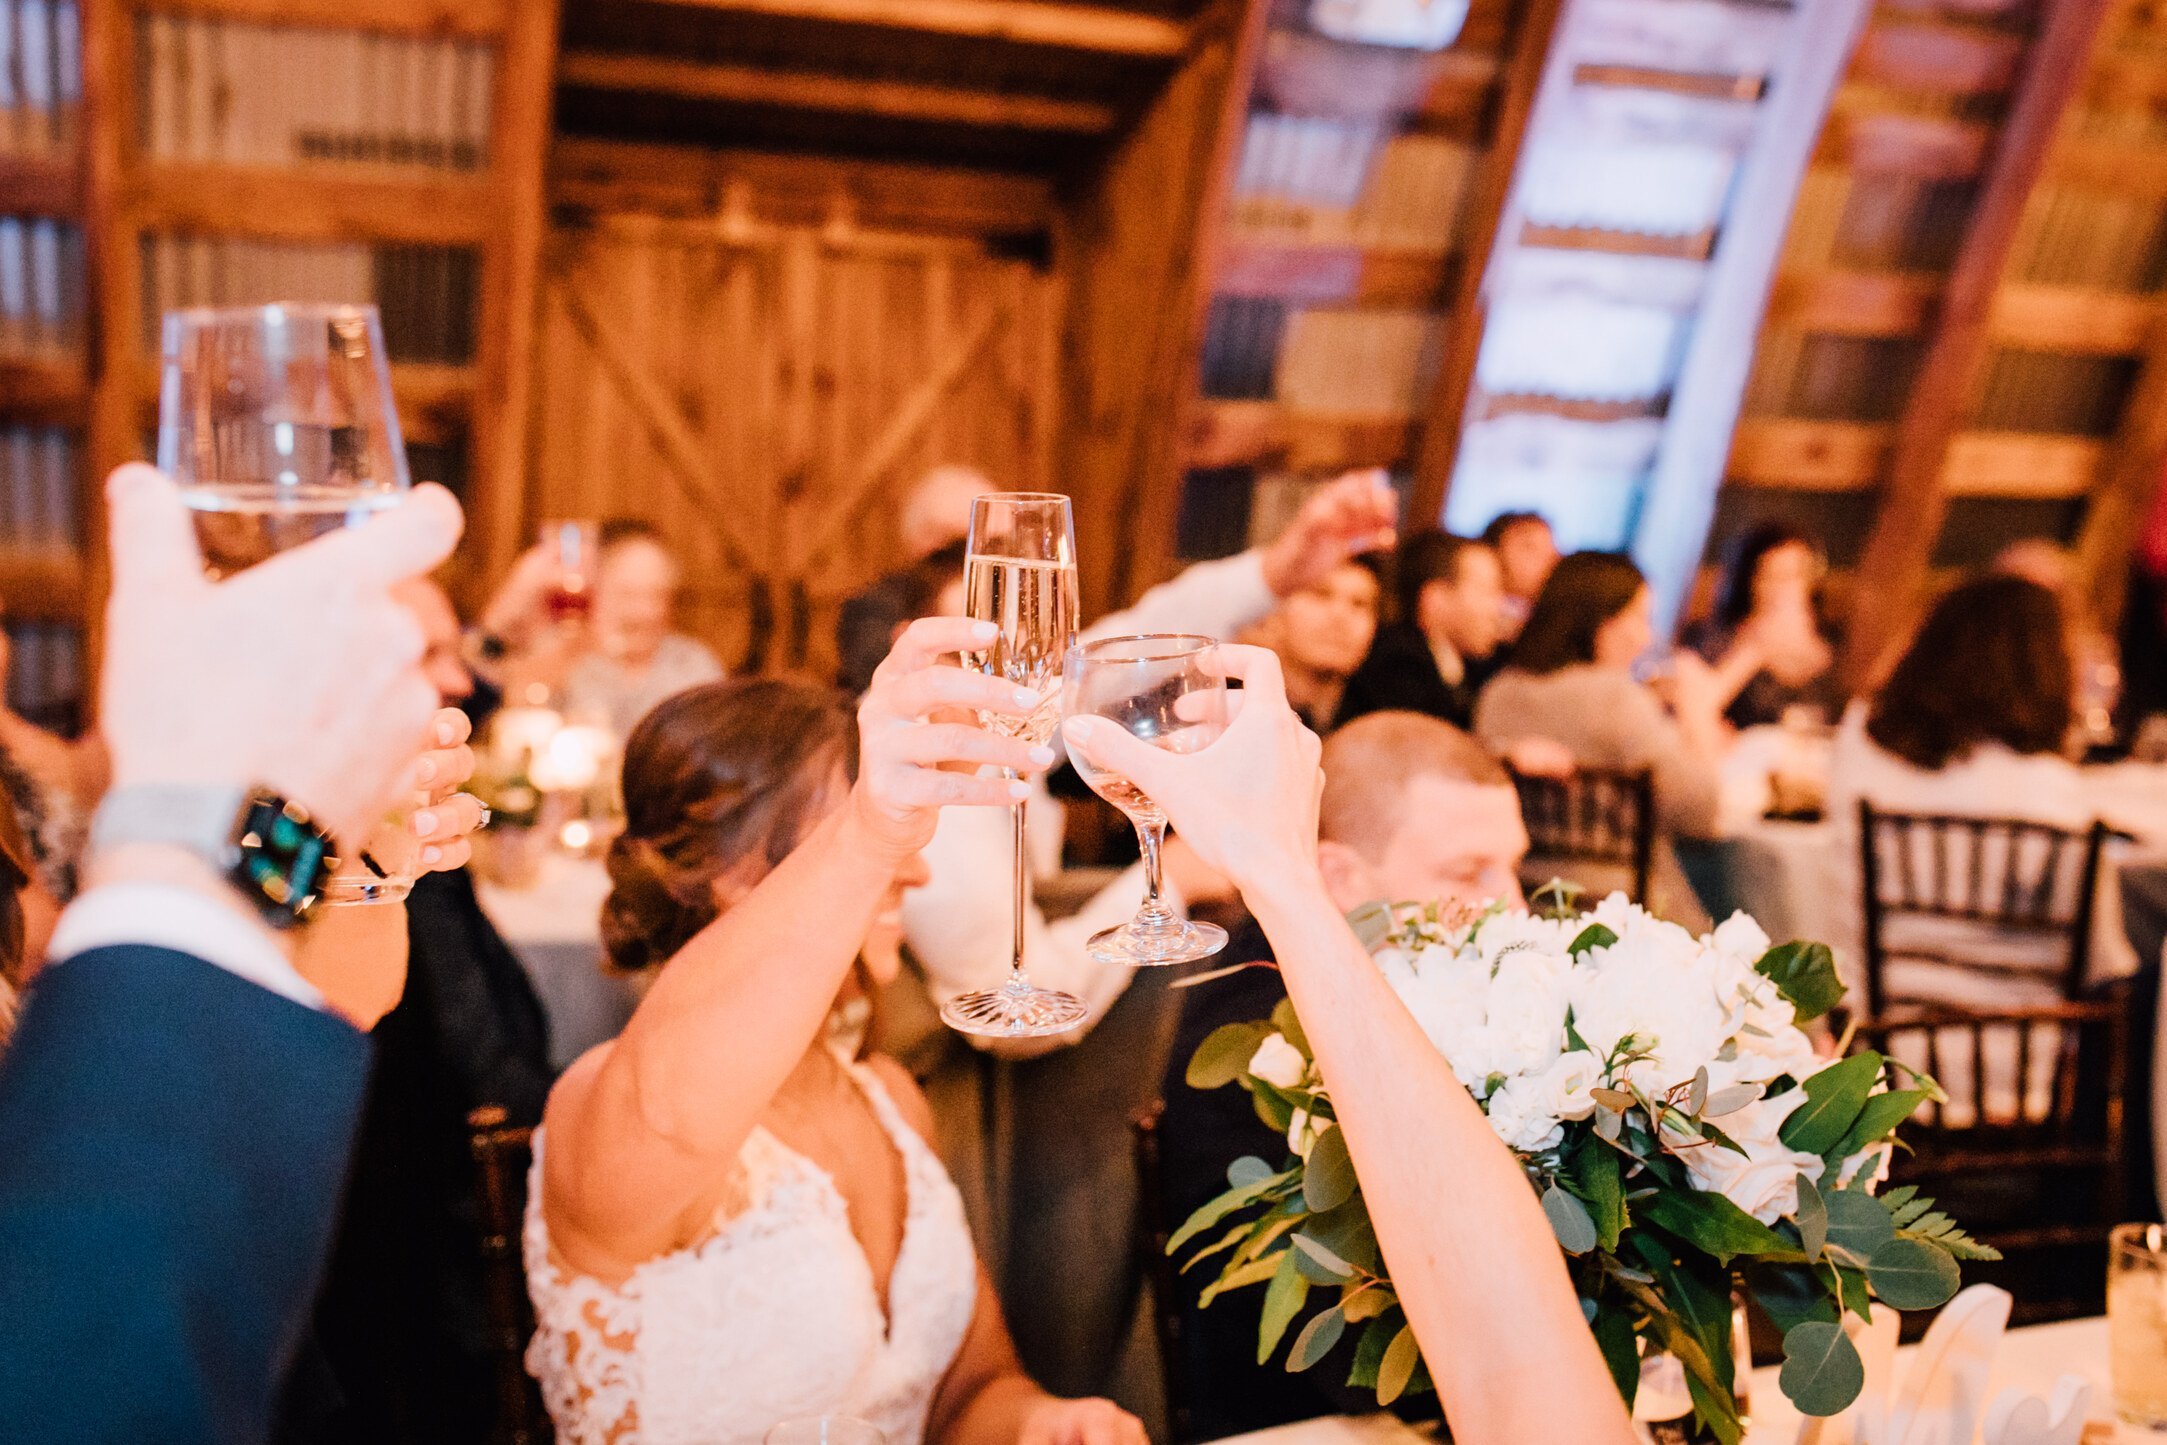  The bride, groom, and guests raise a glass as they listen to toasts at their barn wedding 